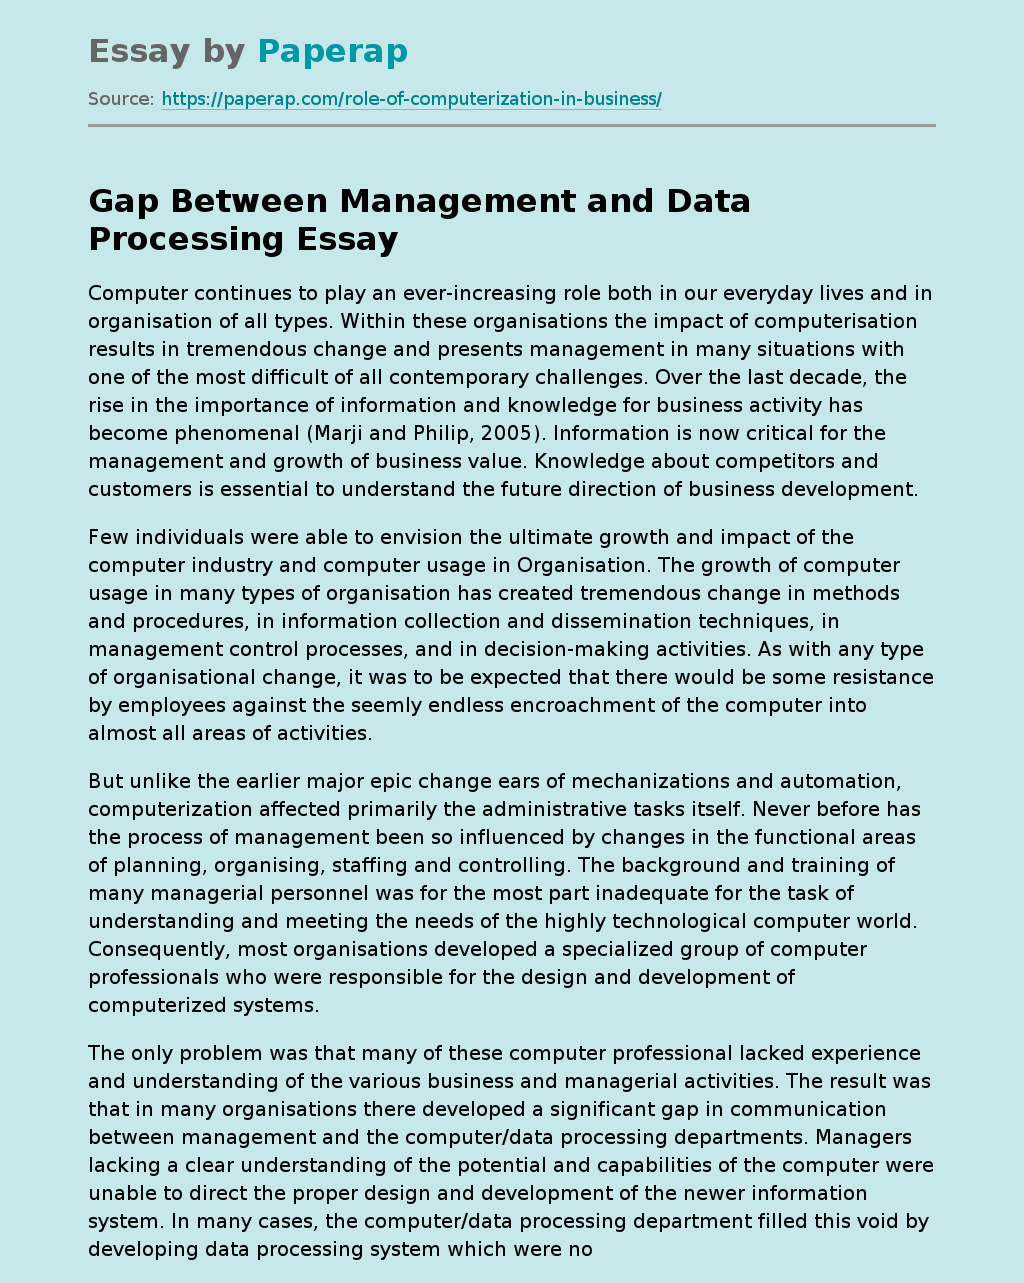 Gap Between Management and Data Processing